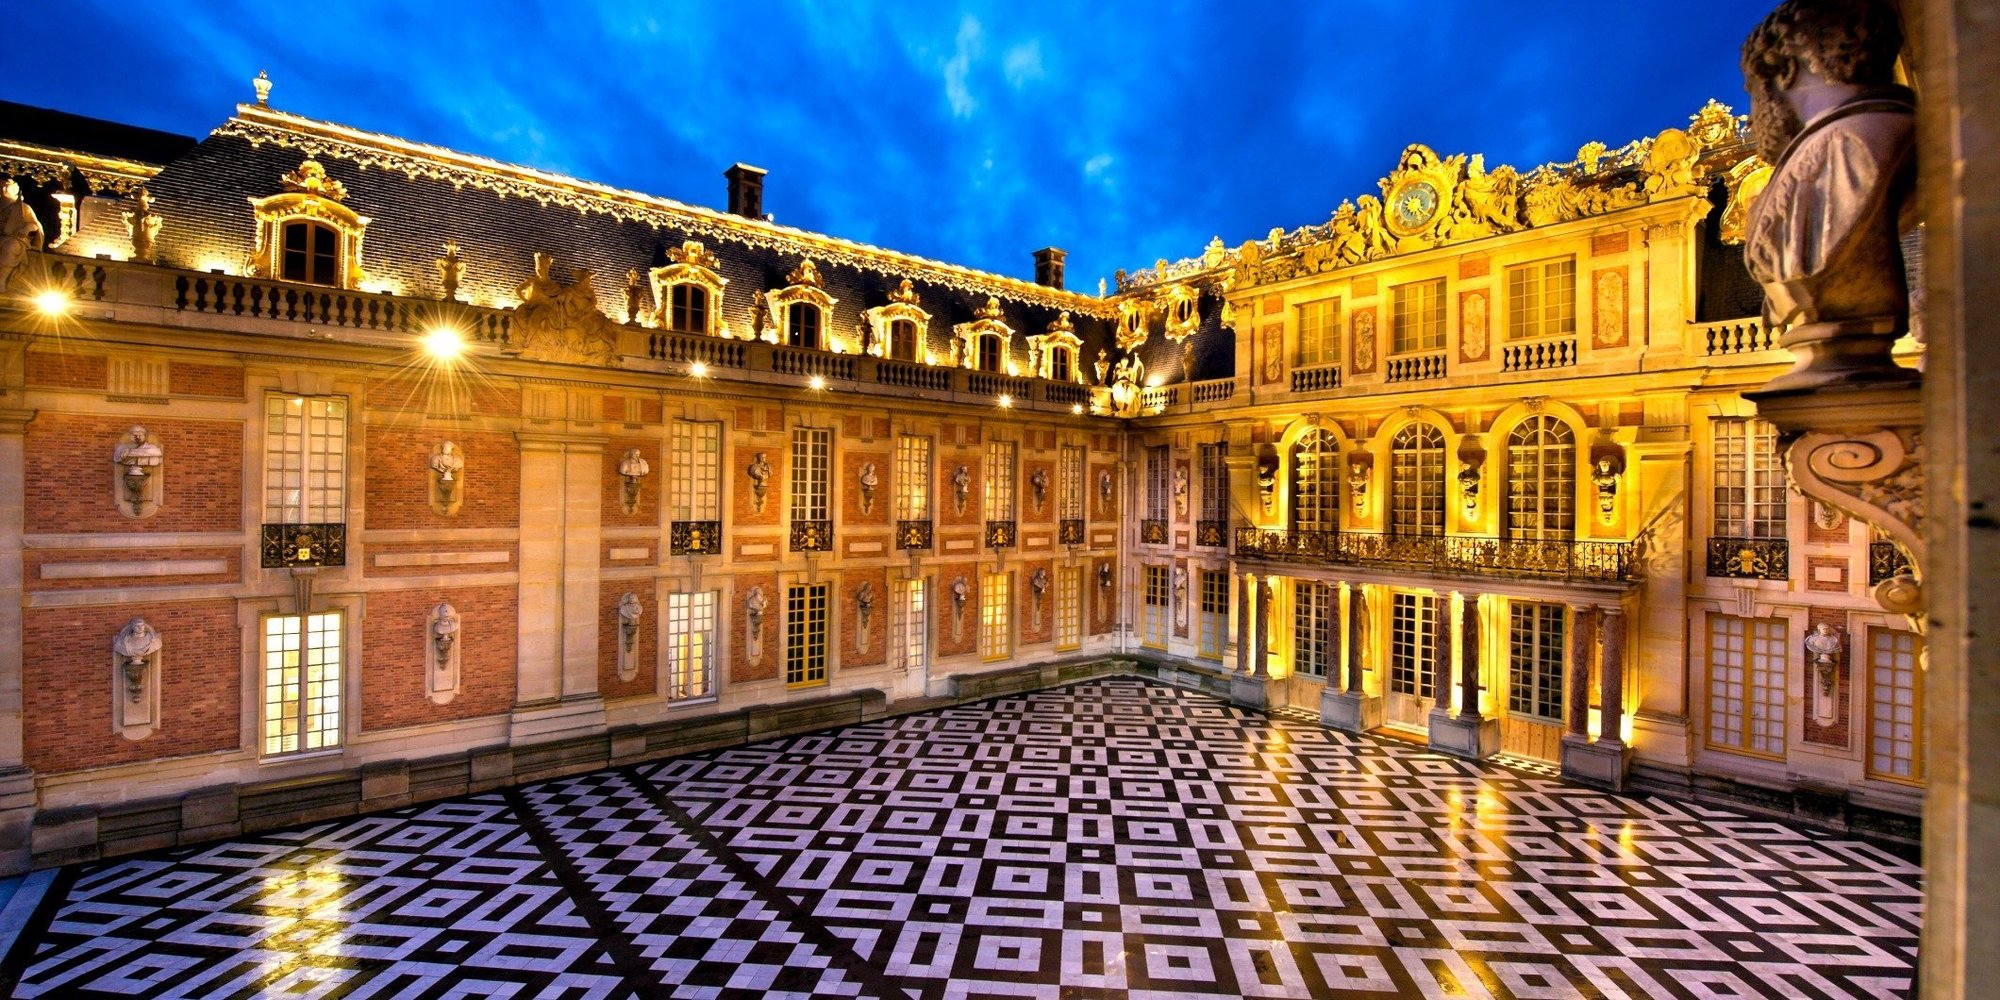 HQ Palace Of Versailles Wallpapers | File 545.43Kb